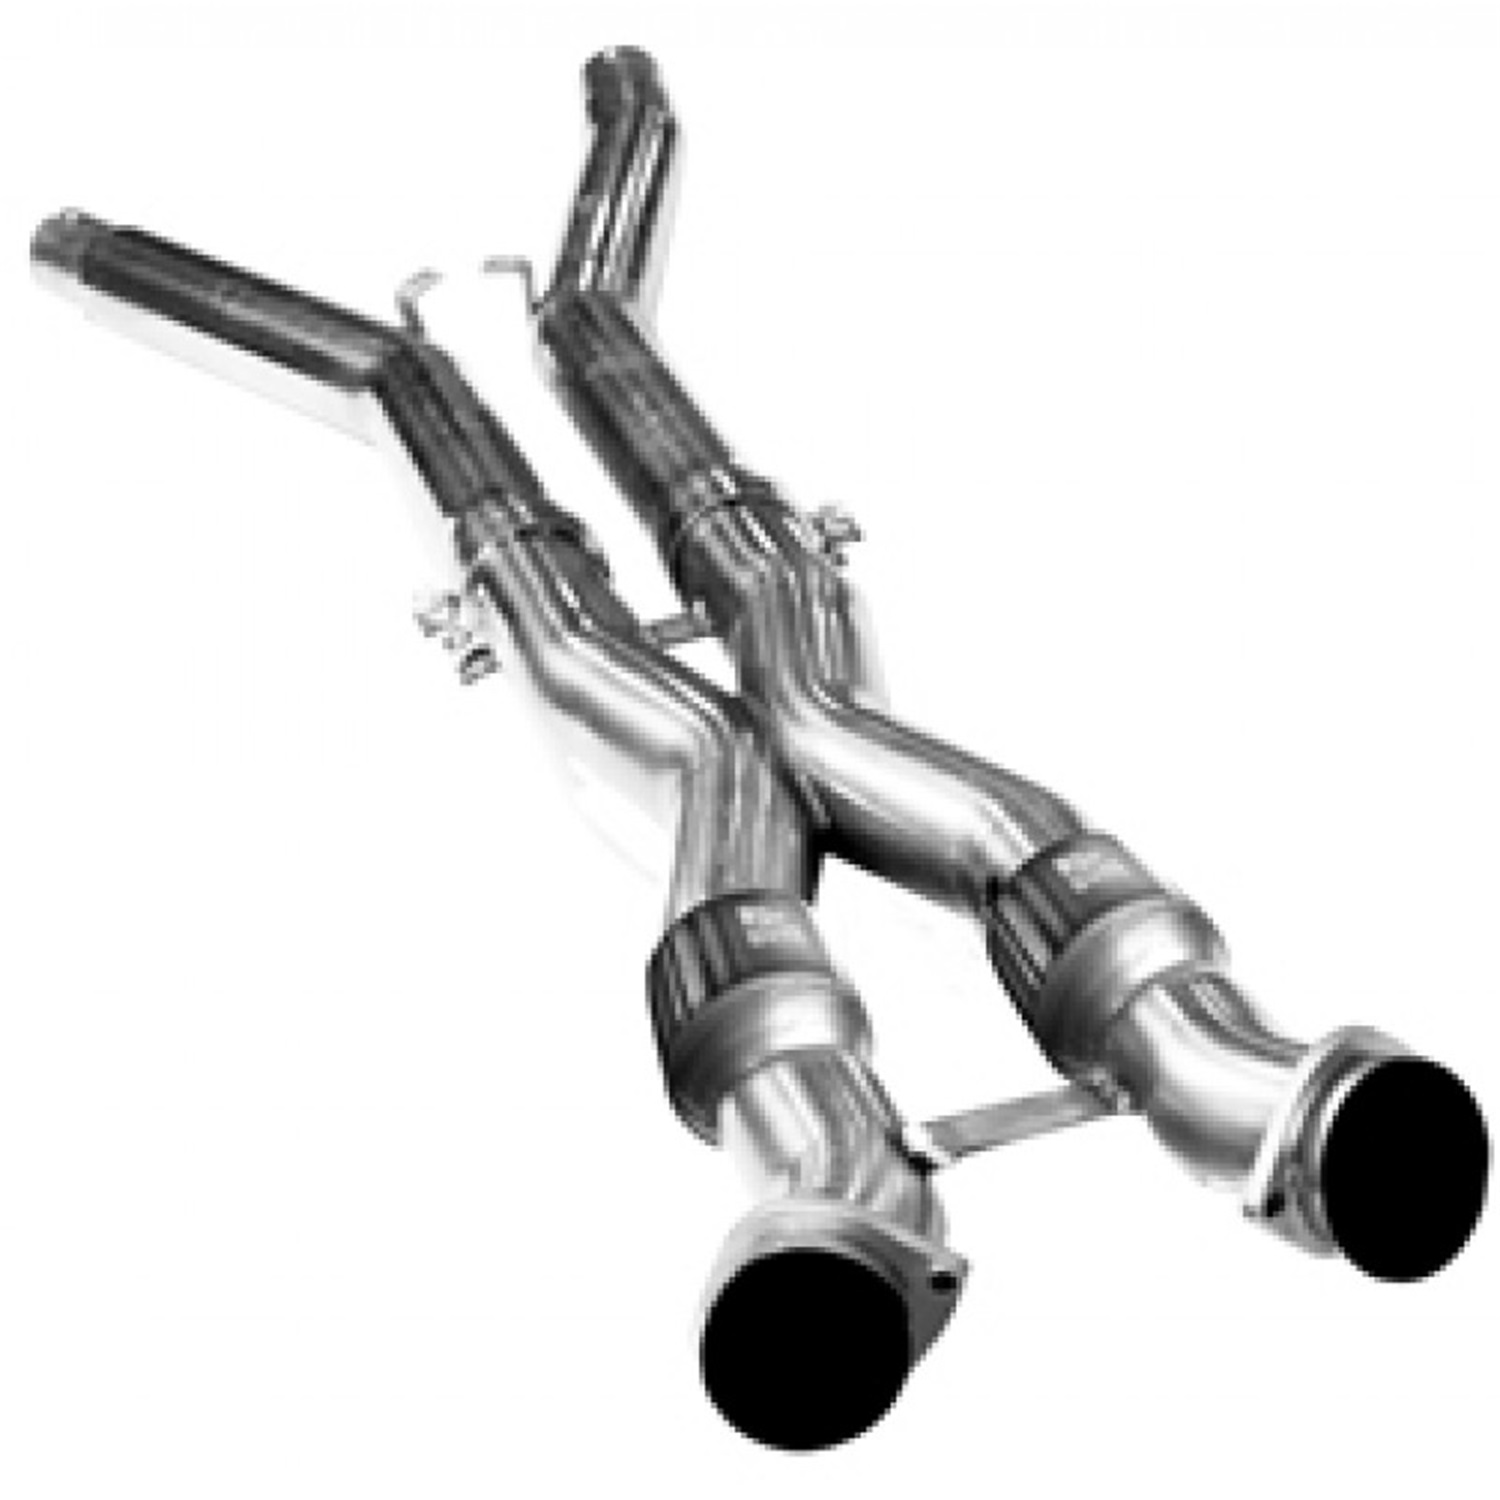 Catted X-Pipe 3 x 3" Connects To 2.5" OEM Style Exhaust Incl. 3 x 2.5" Mid-Pipes 05-08 Corvette C6 LS2/LS3 6.0L/6.2L